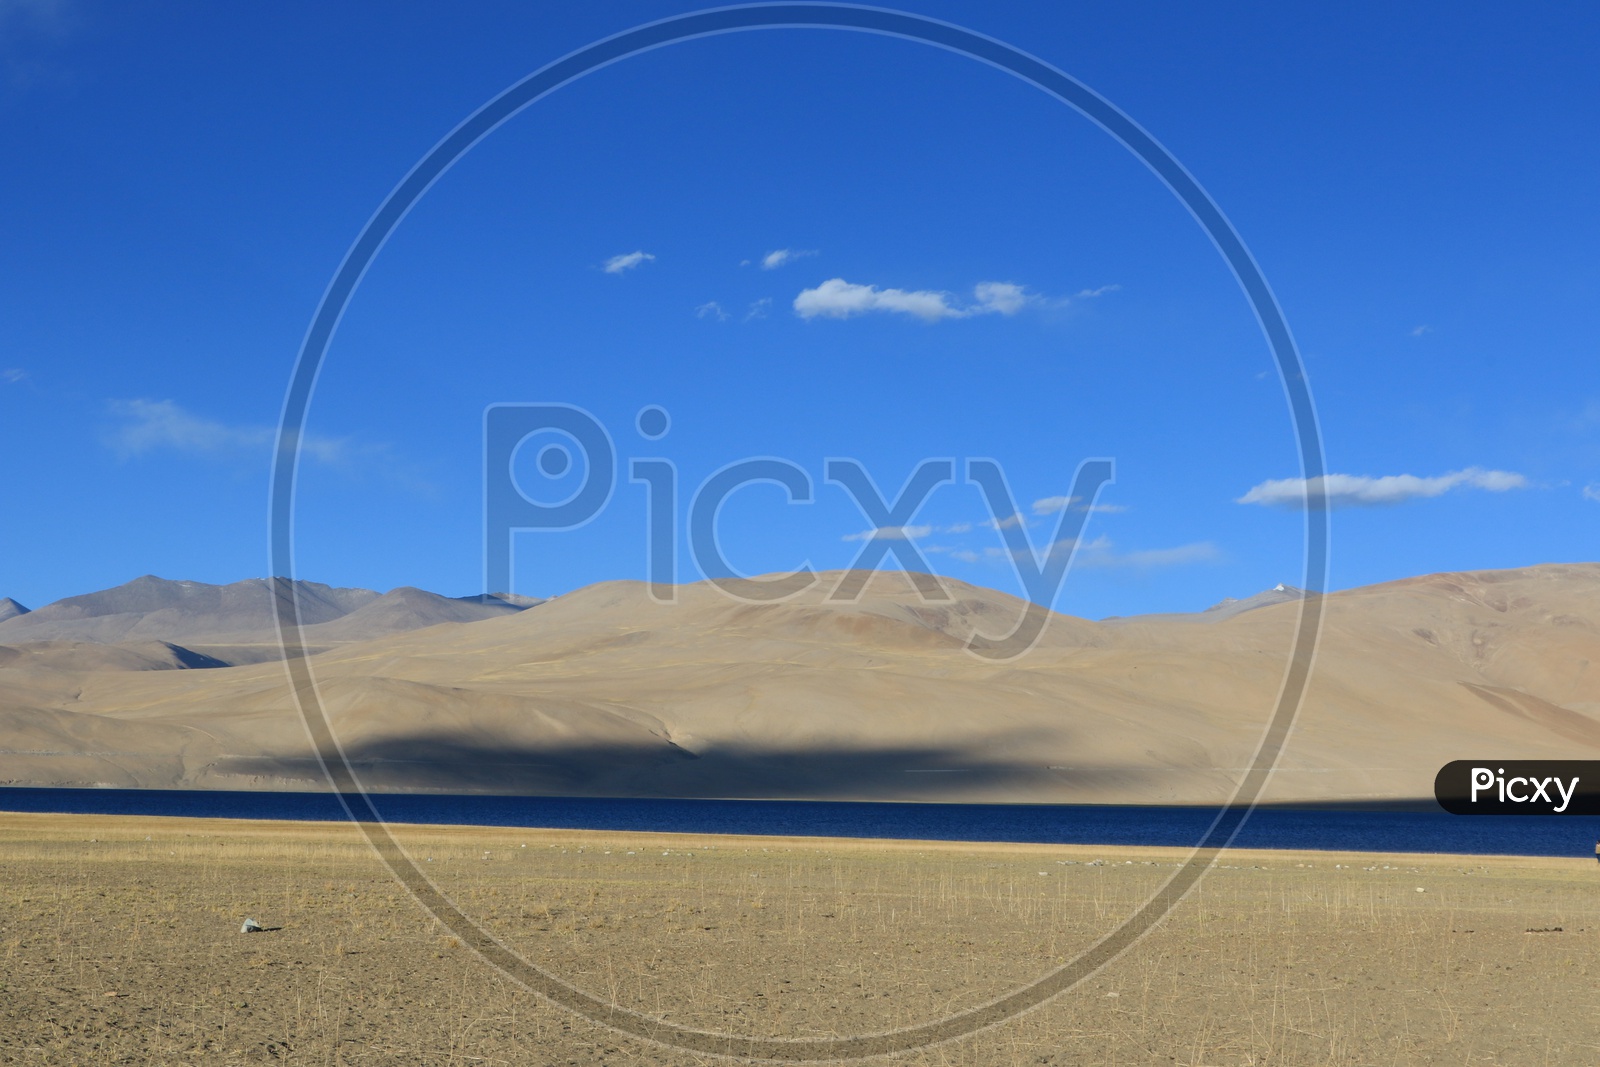 A River Valley With Sand Dunes and Blue Sky in Leh